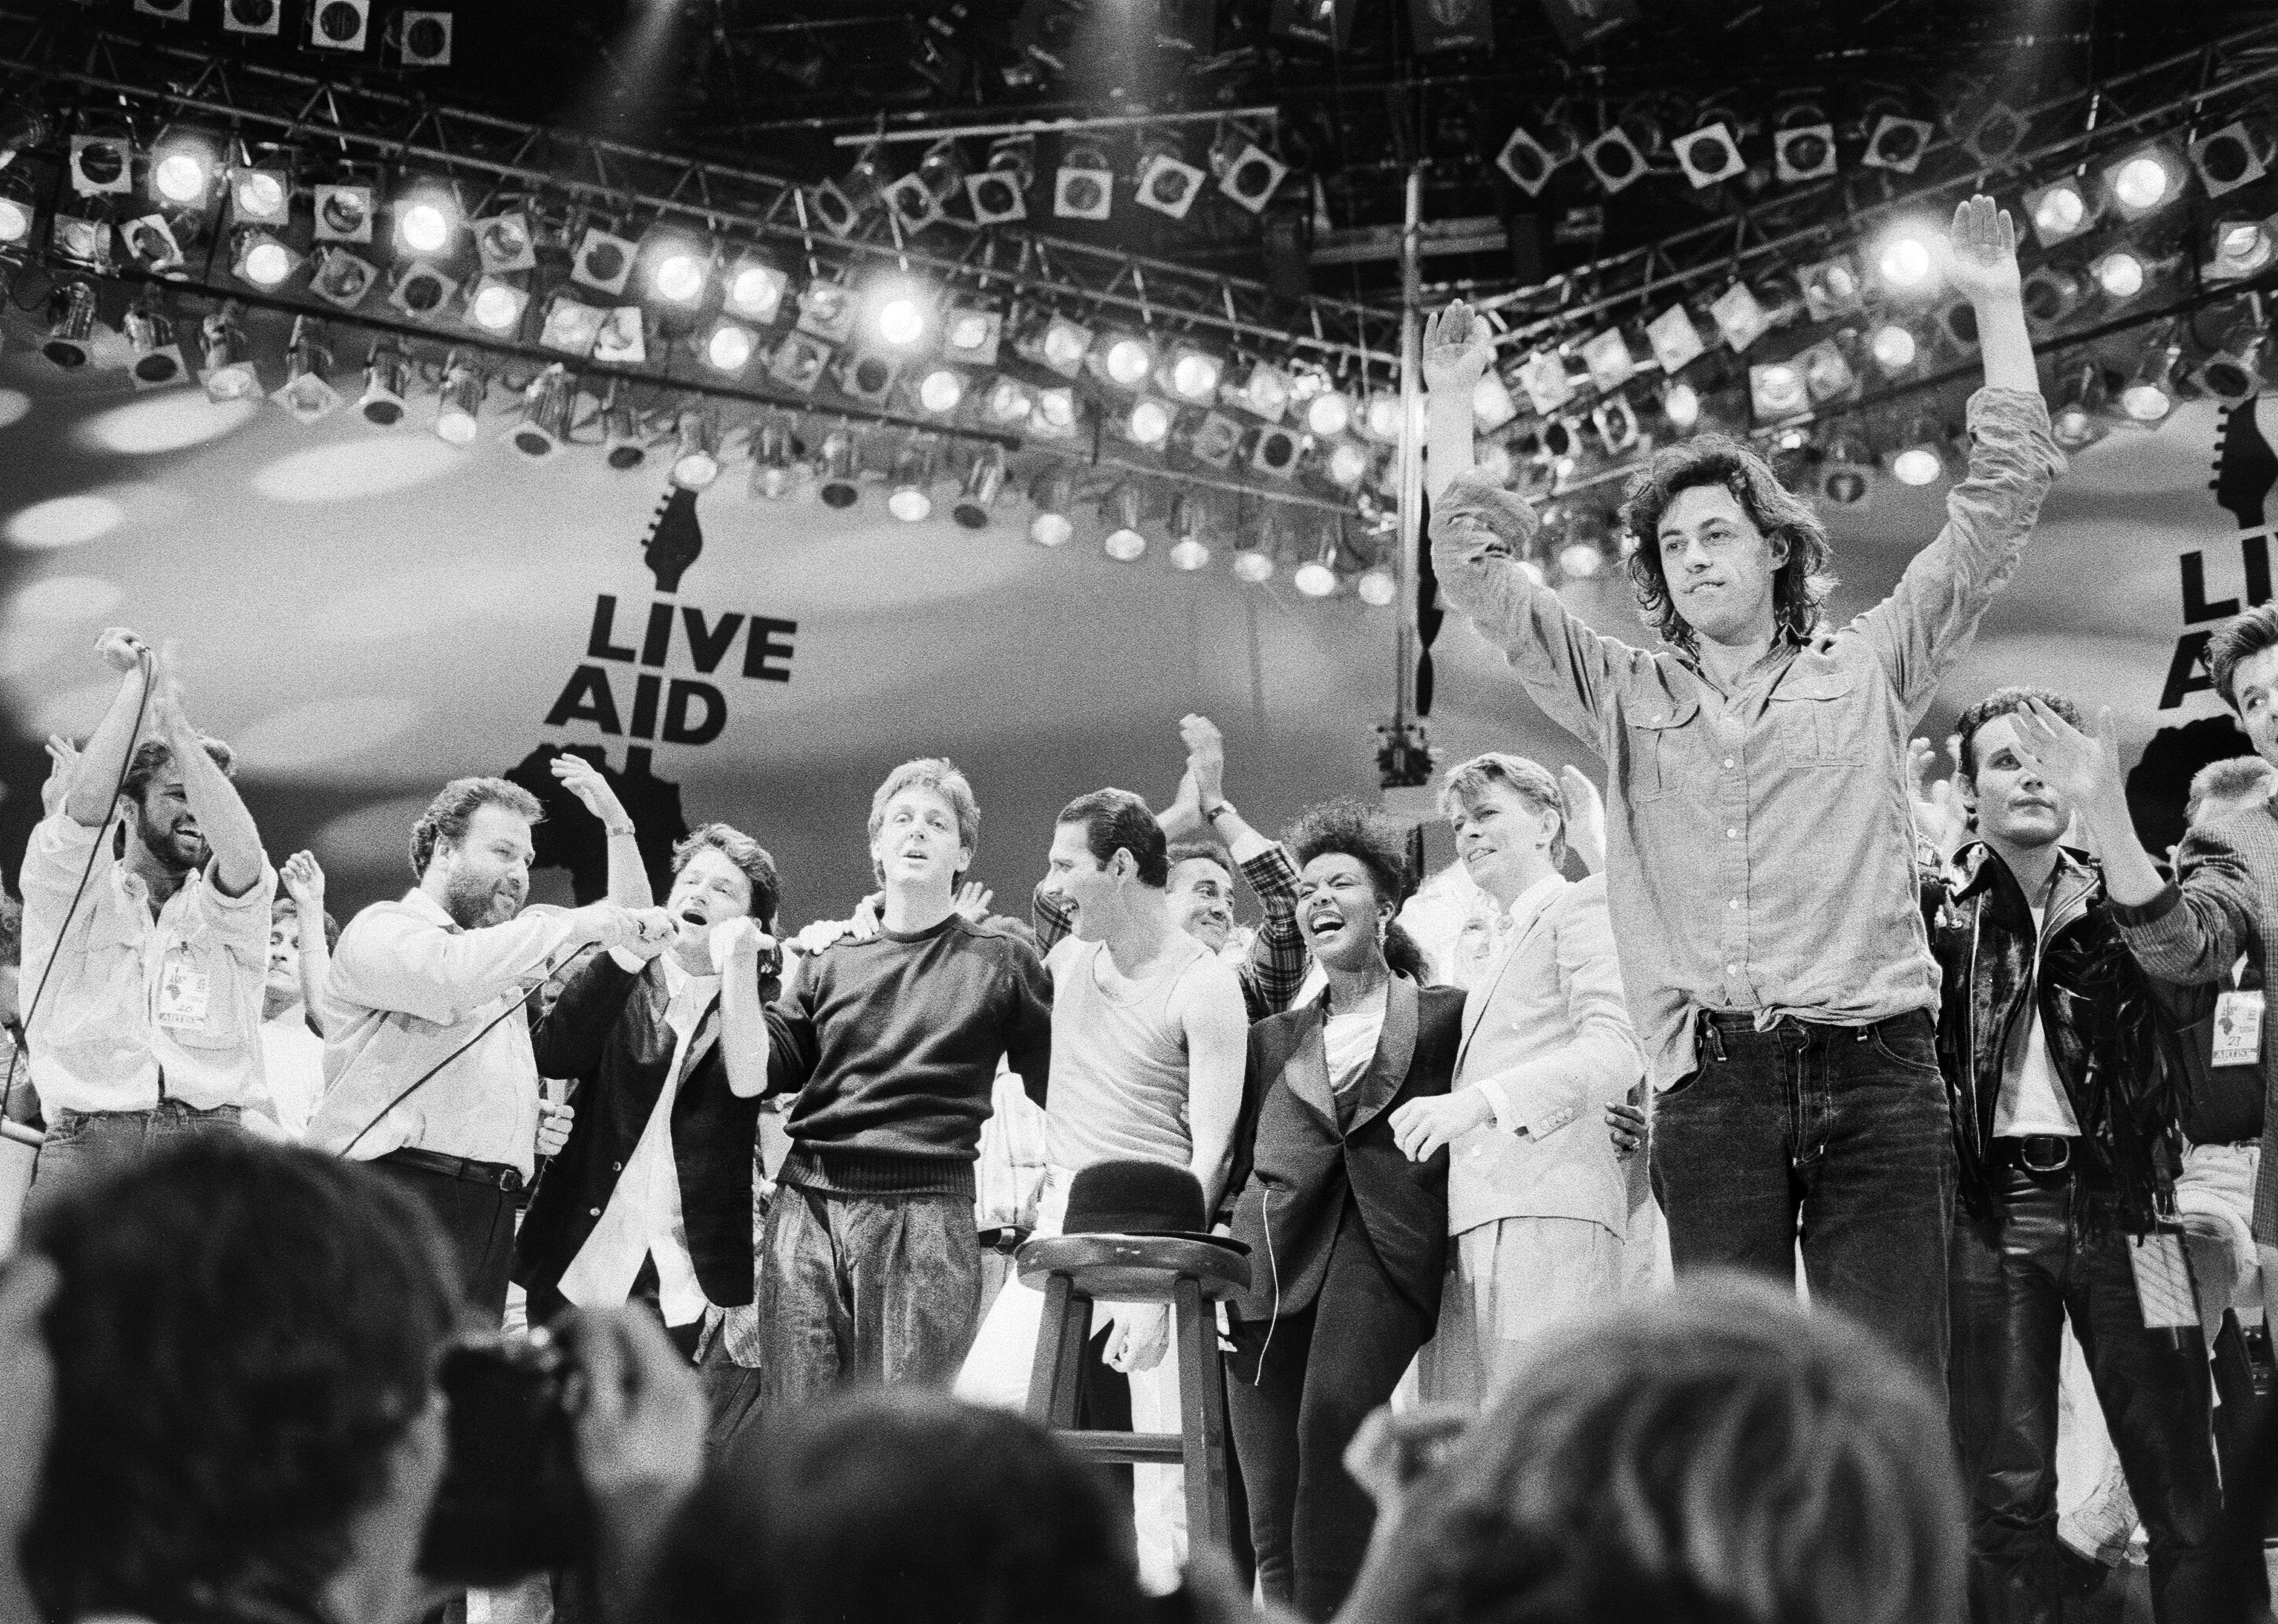 Live Aid performers on stage for the grand finale of the concert at Wembley.